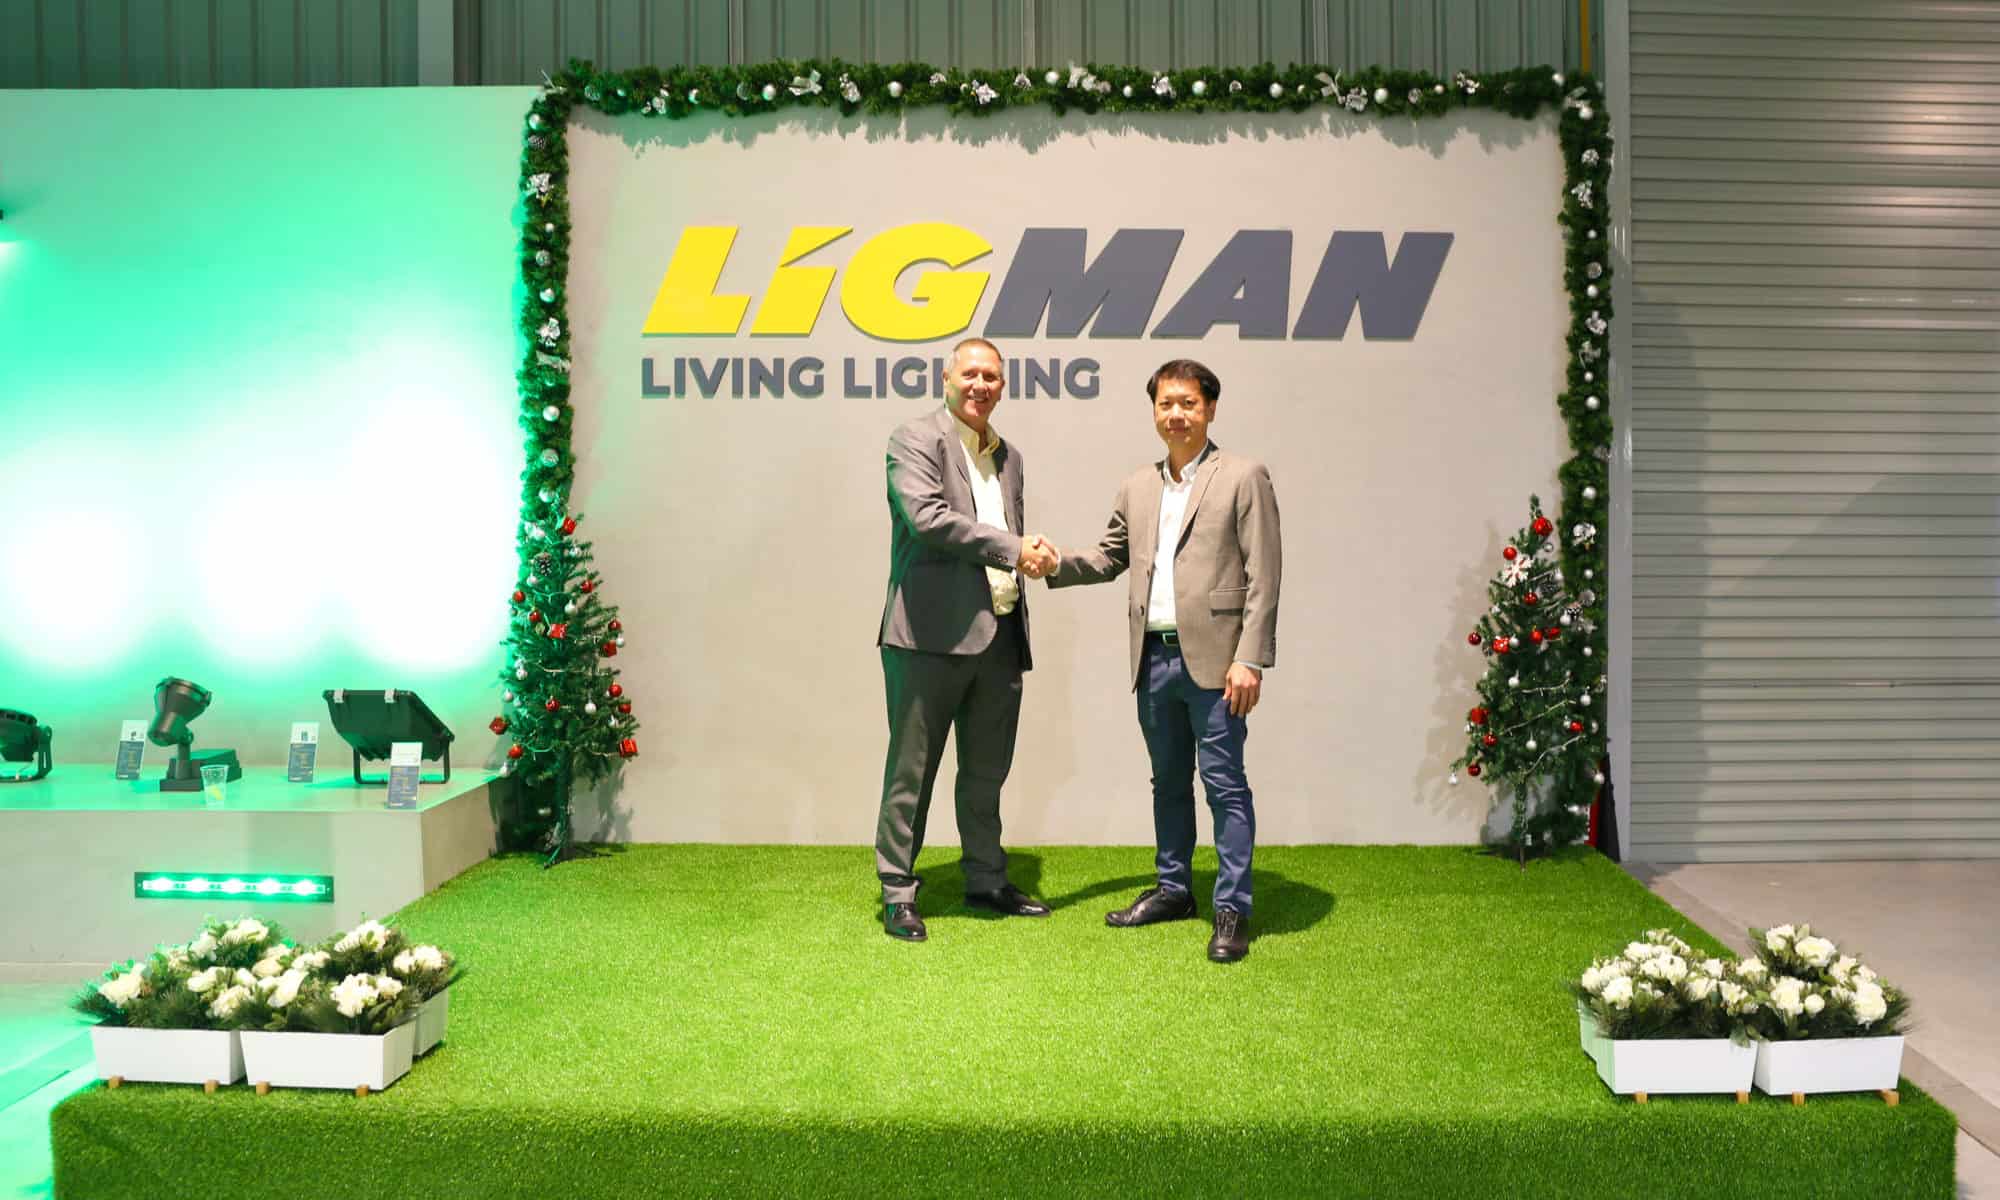 Telensa and LIGMAN Announce Strategic Partnership to Provide Smart Street Lighting and Smart City Sensing to Asia Pacific Market